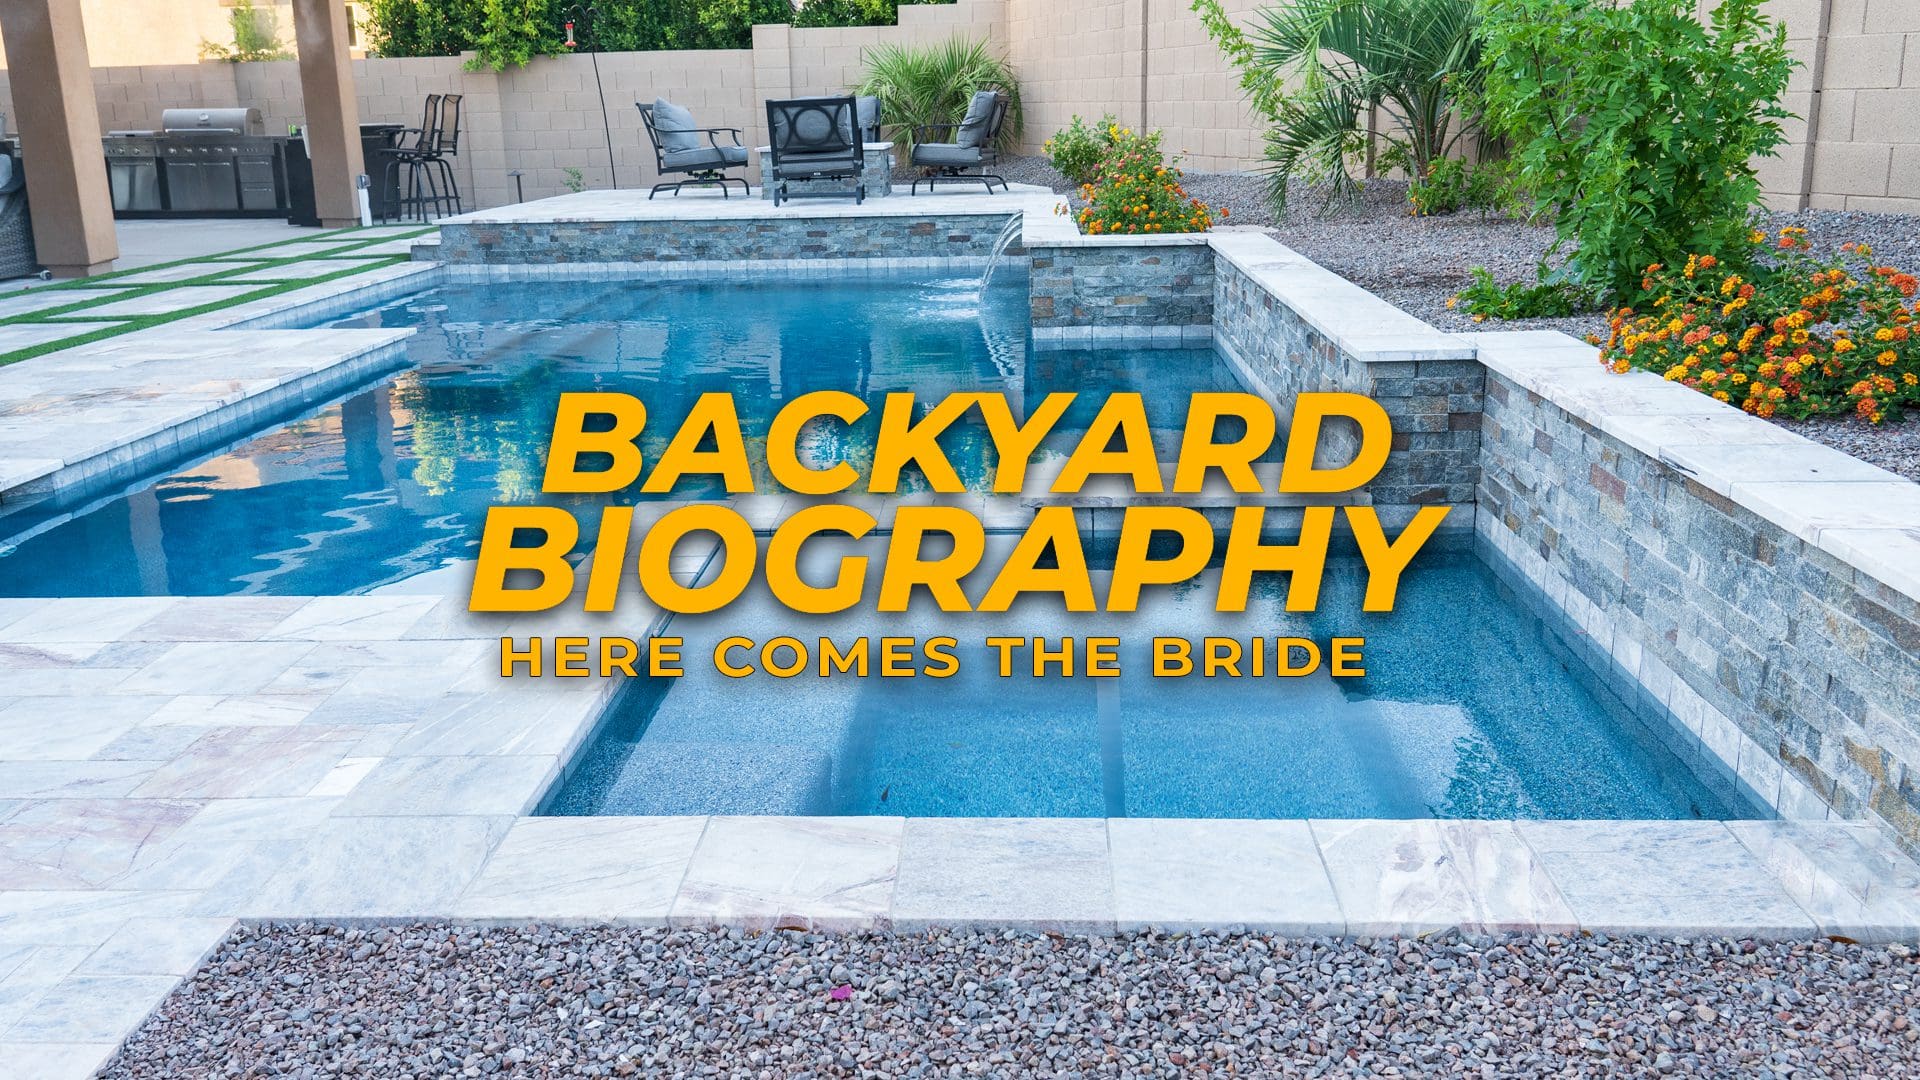 Backyard Biography – Here Comes The Bride